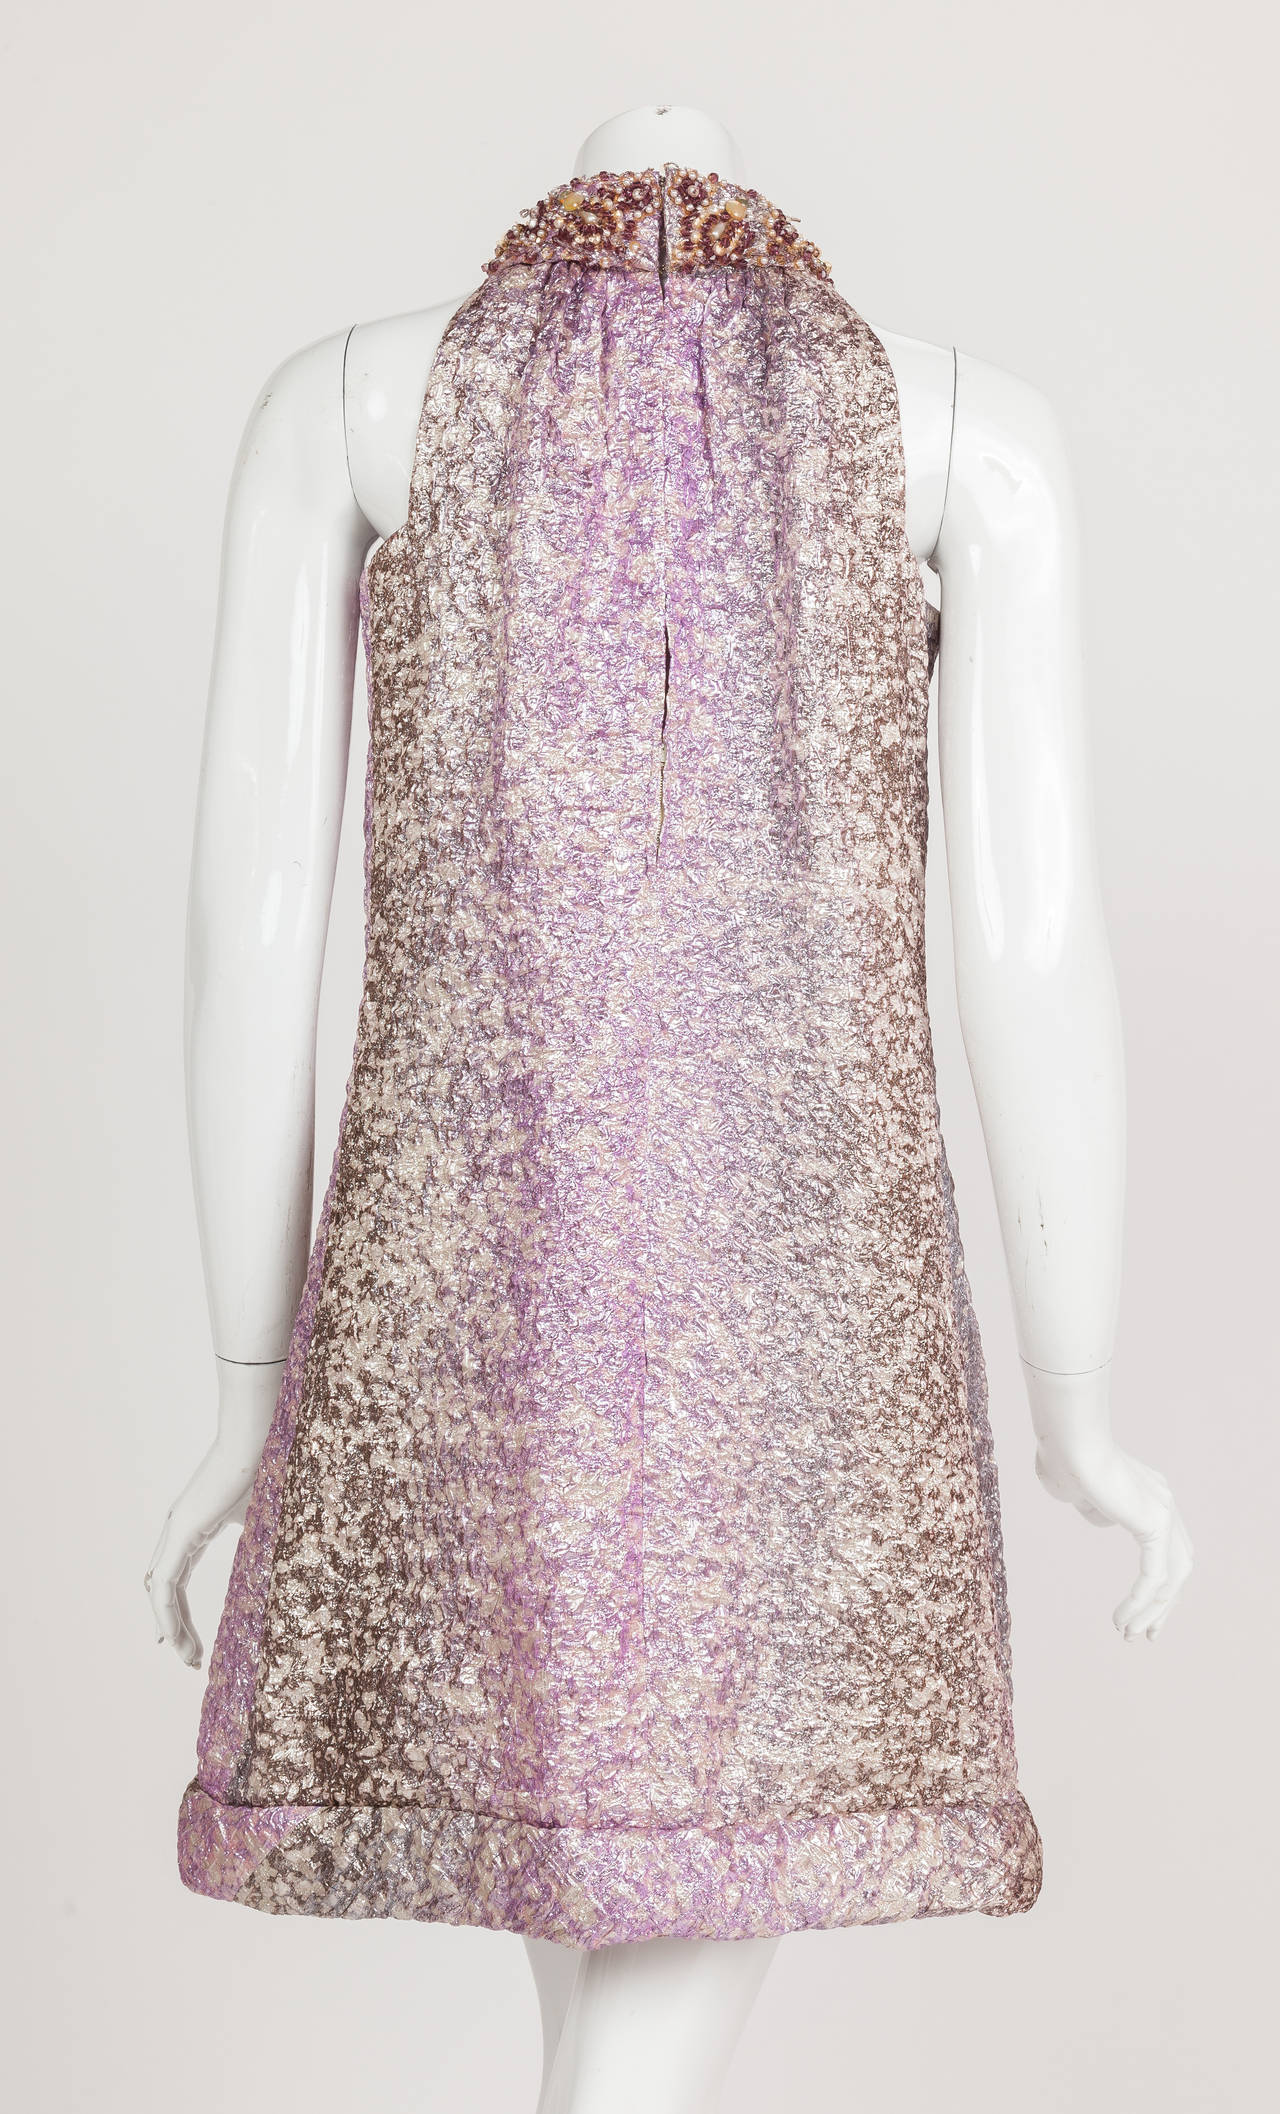 A circa 1966 Pierre Cardin haute couture cocktail dress in purple, silver and pink ombre lame with beading at the collar and the classic Cardin keyhole opening at the back below the neck. I love this sexy yet chic dress and its treatment of the 